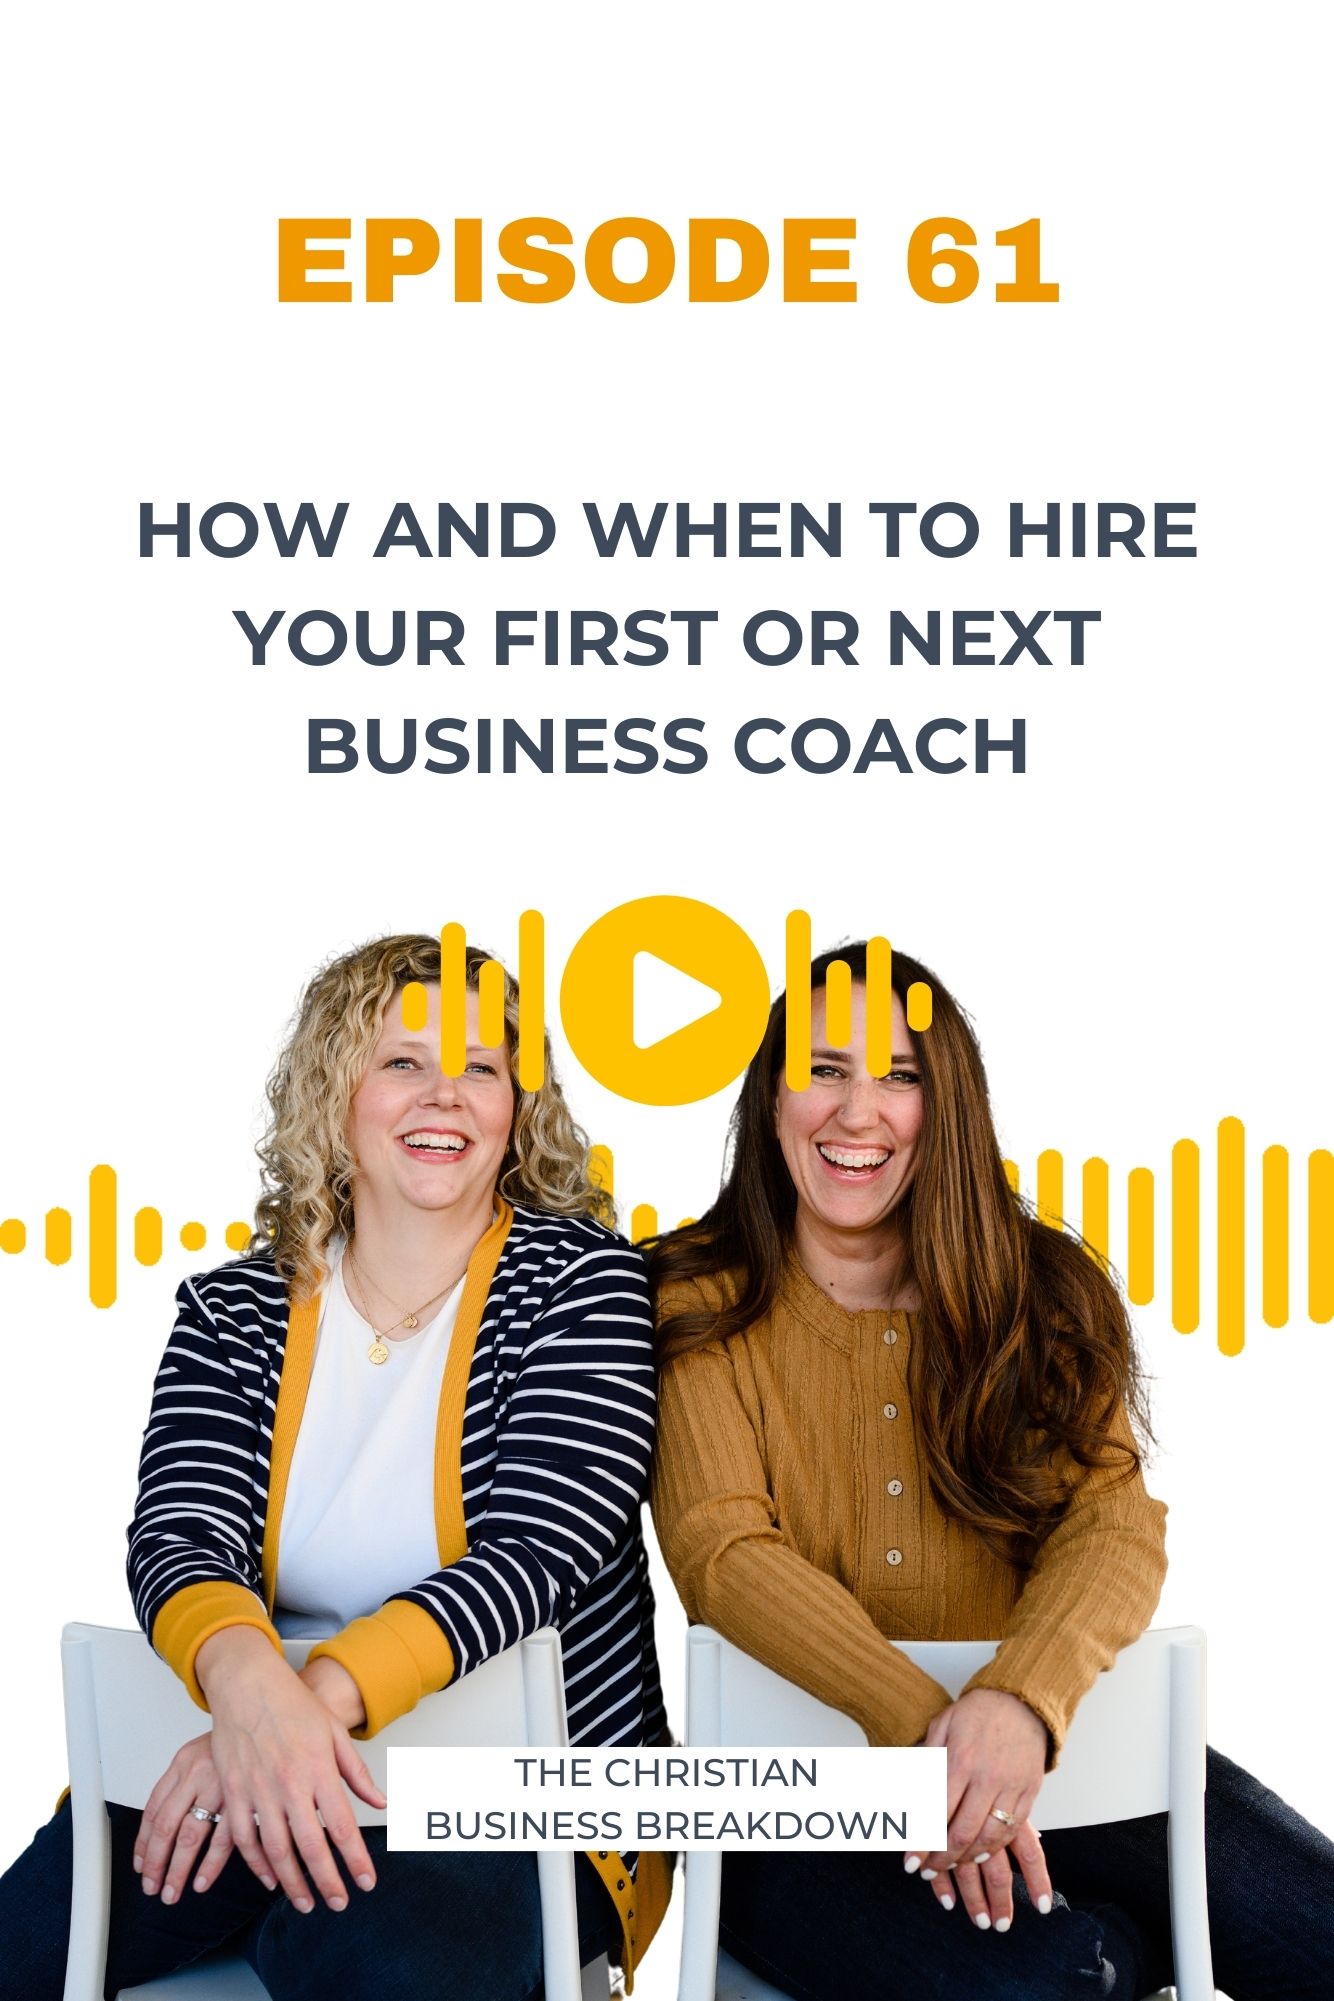 How and when to hire your first or next business coach. A graphic of two busines women who are podcasters and christian business coaches.